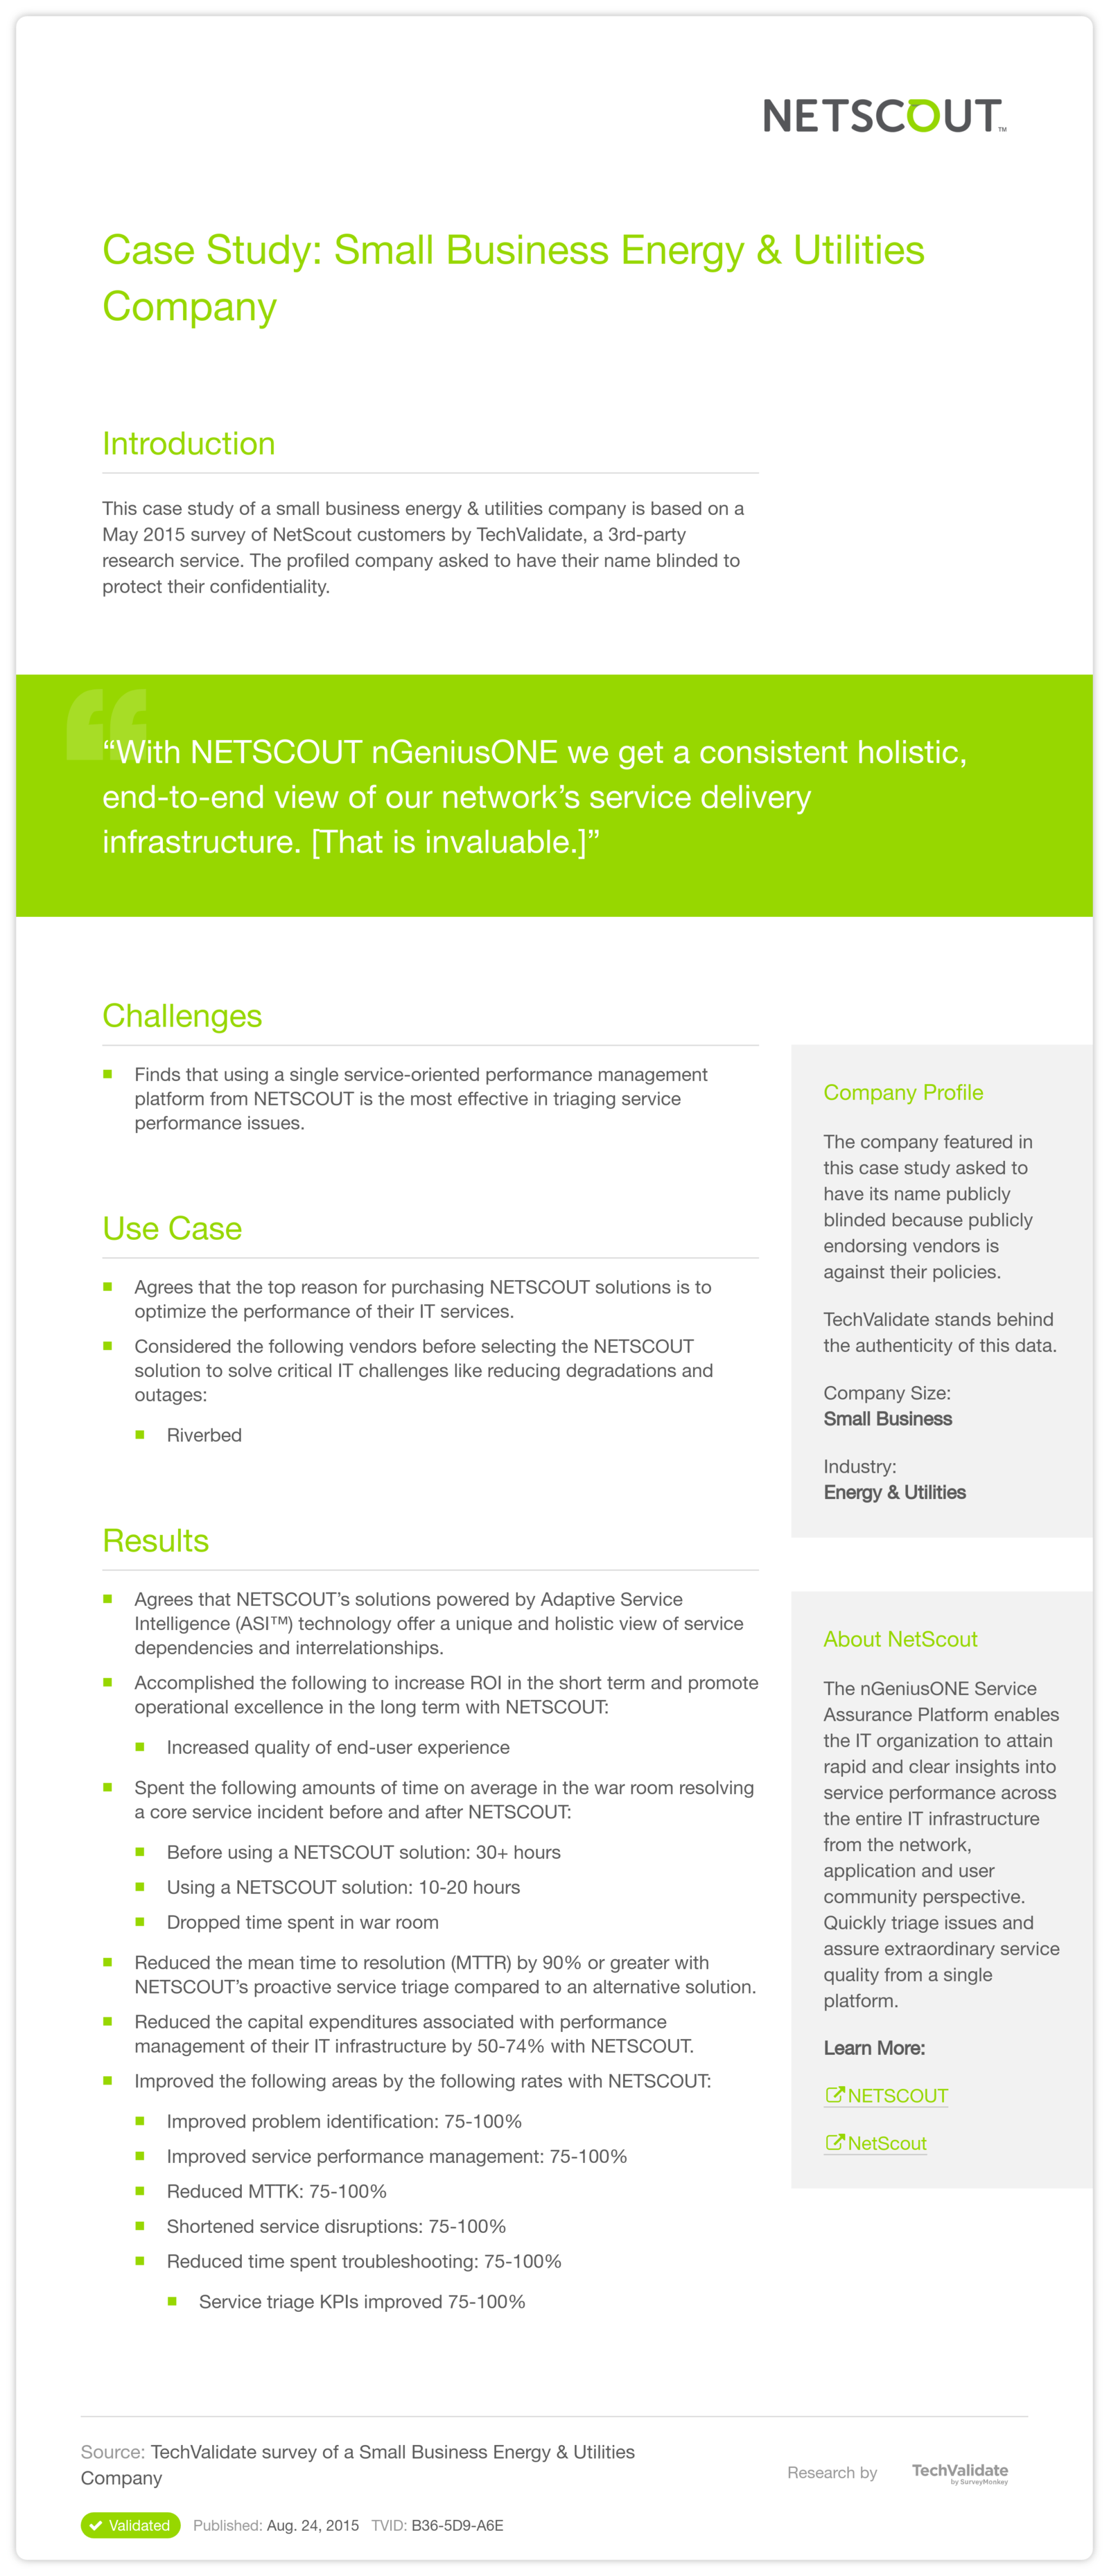 Case Study: Small Business Energy & Utilities Company